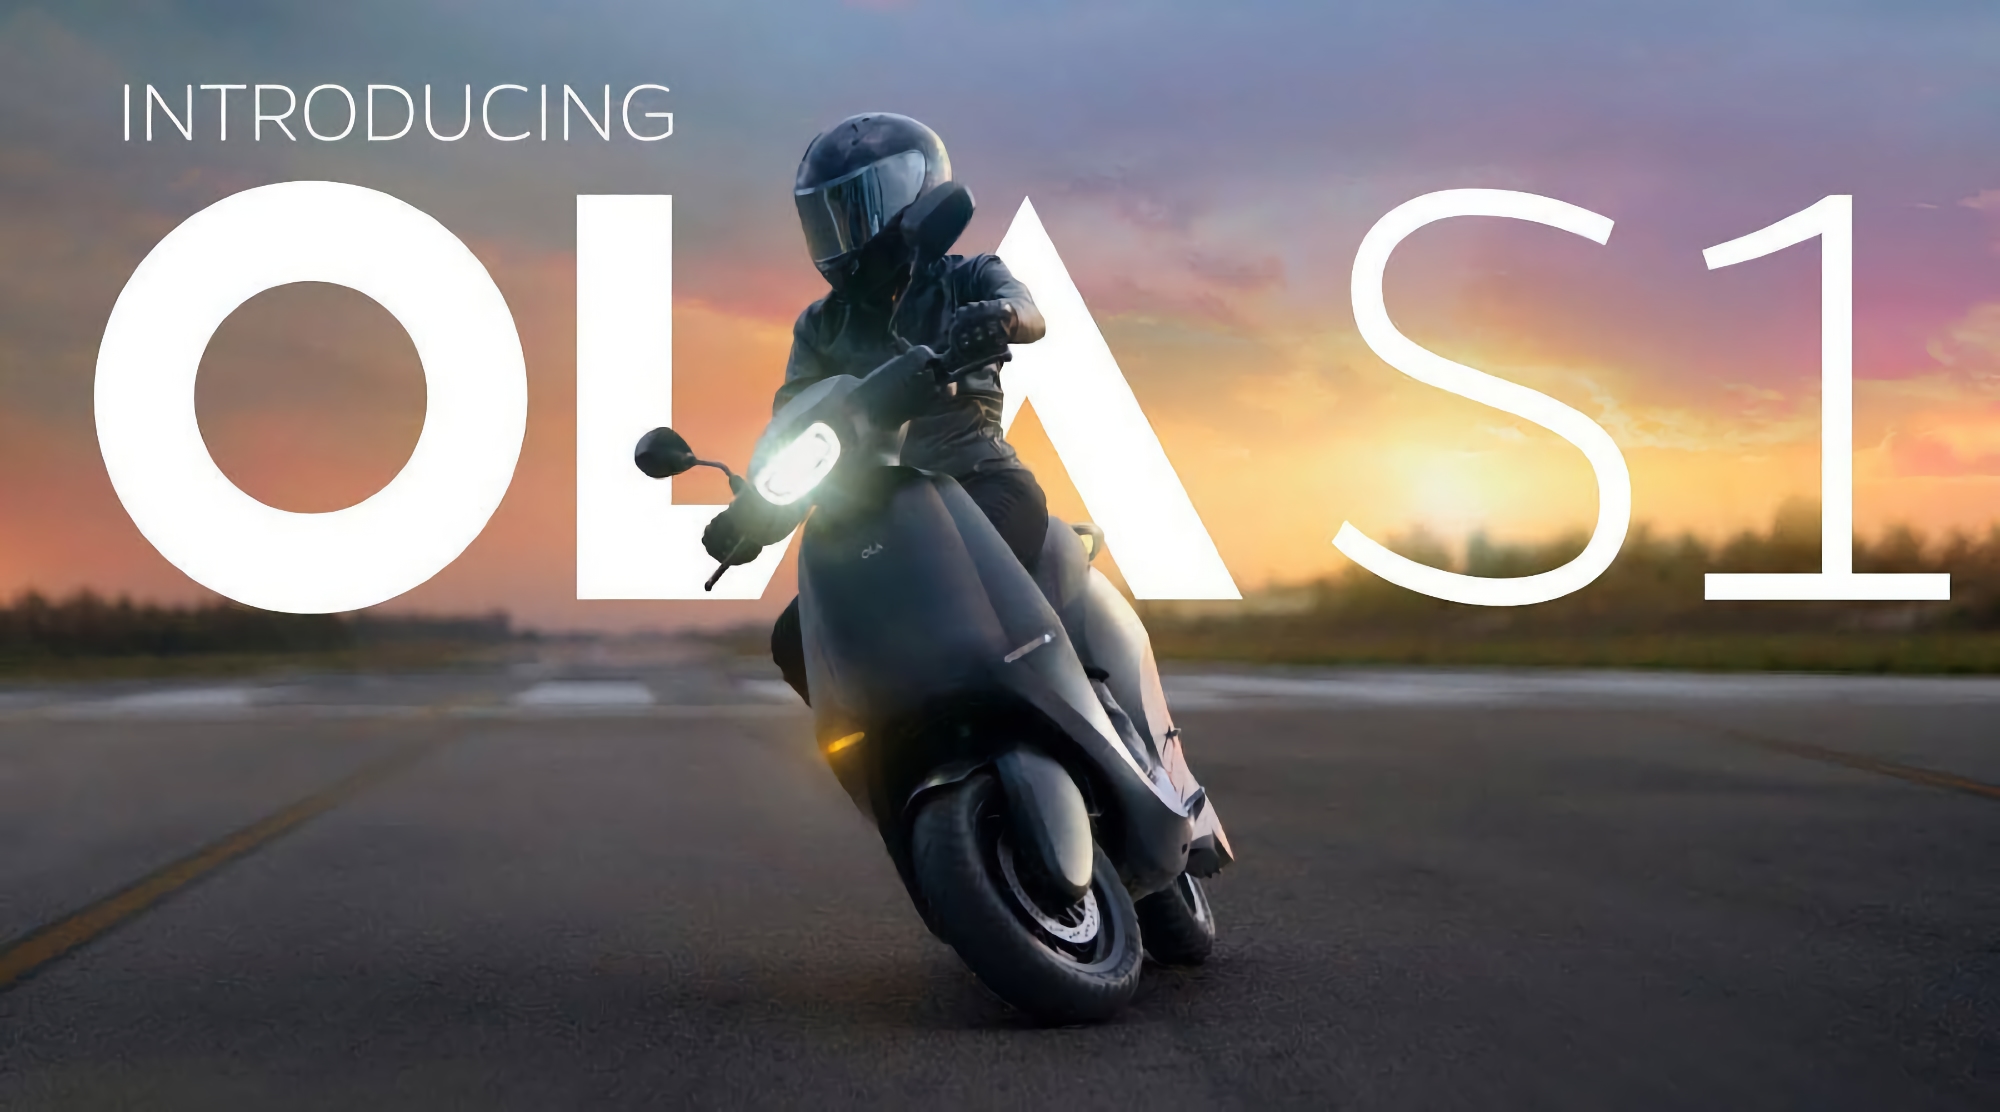 Ola S1 and Ola S1 Pro: electric scooters with cruise control, speed up to 110 km/h, range up to 181 km and price starting from $1350